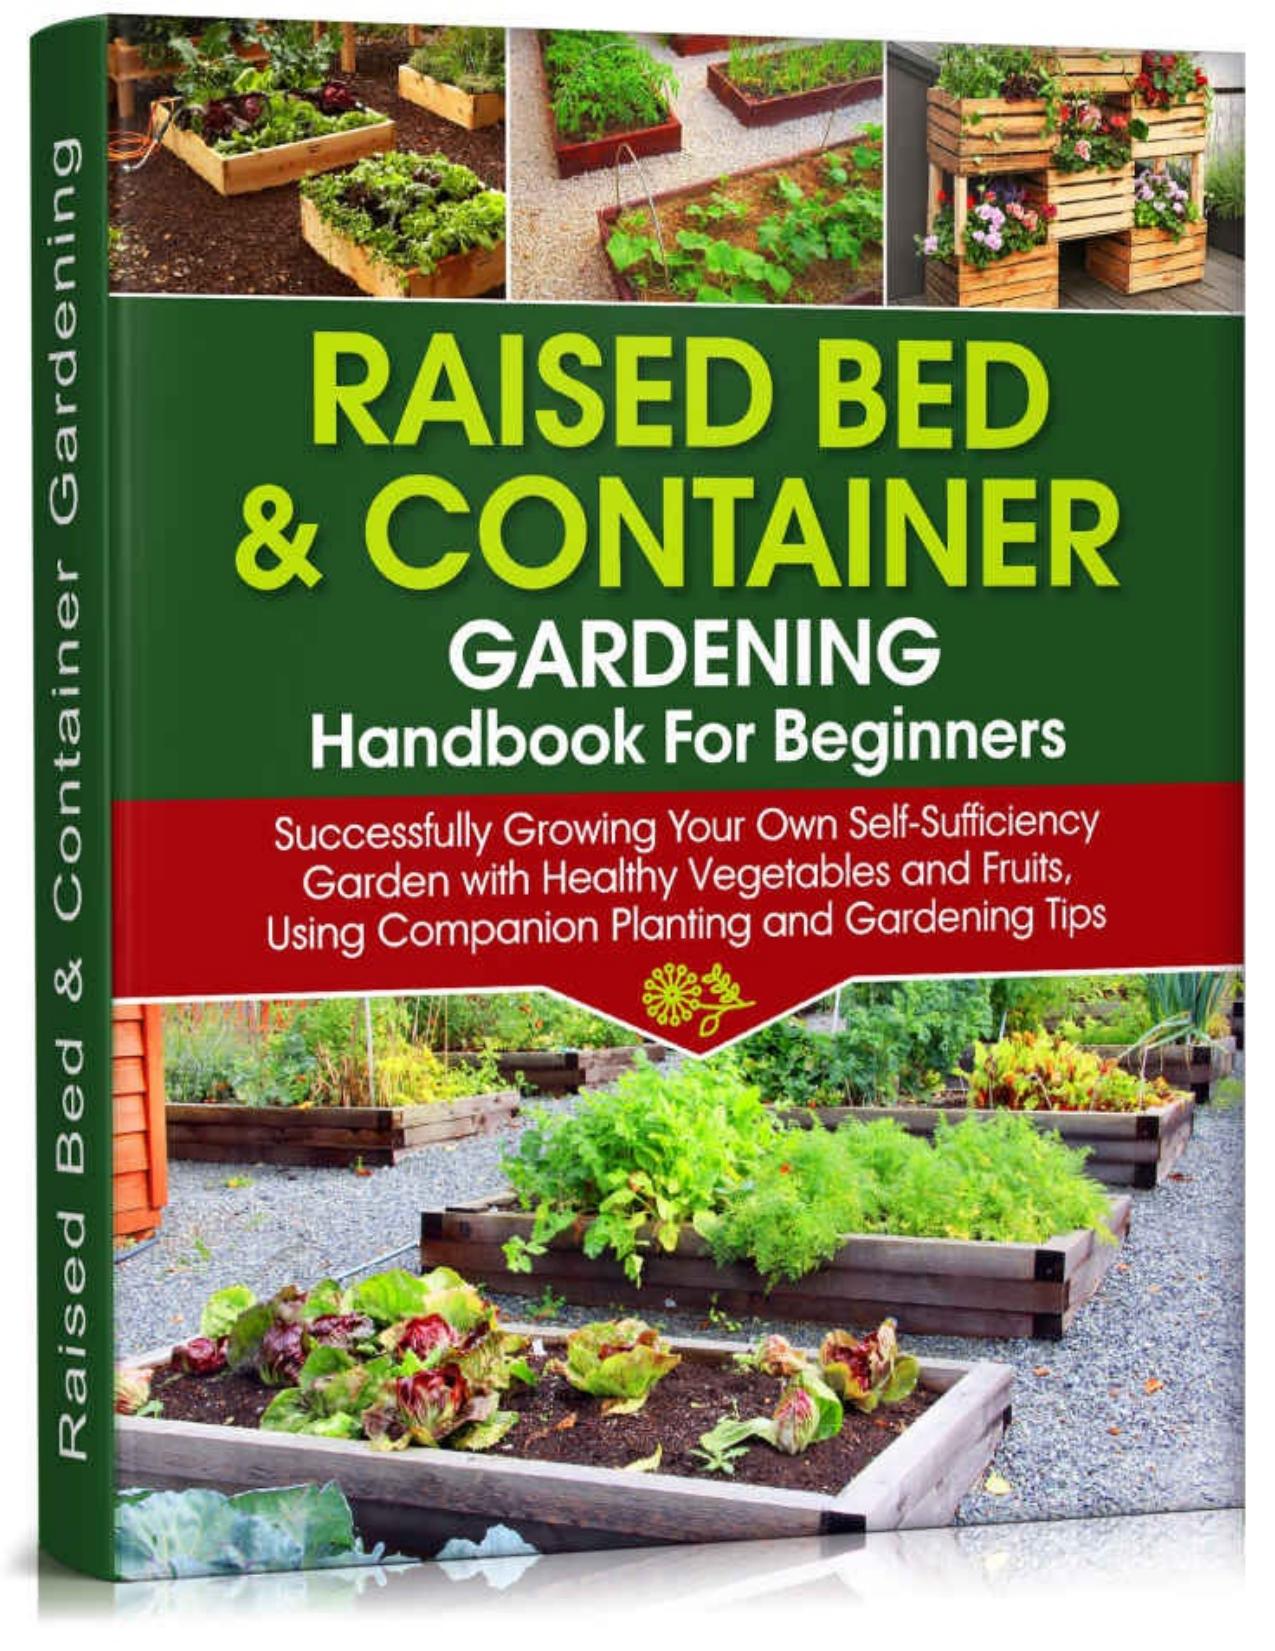 Raised Bed & Container Gardening Handbook For Beginners by Bradford Collin